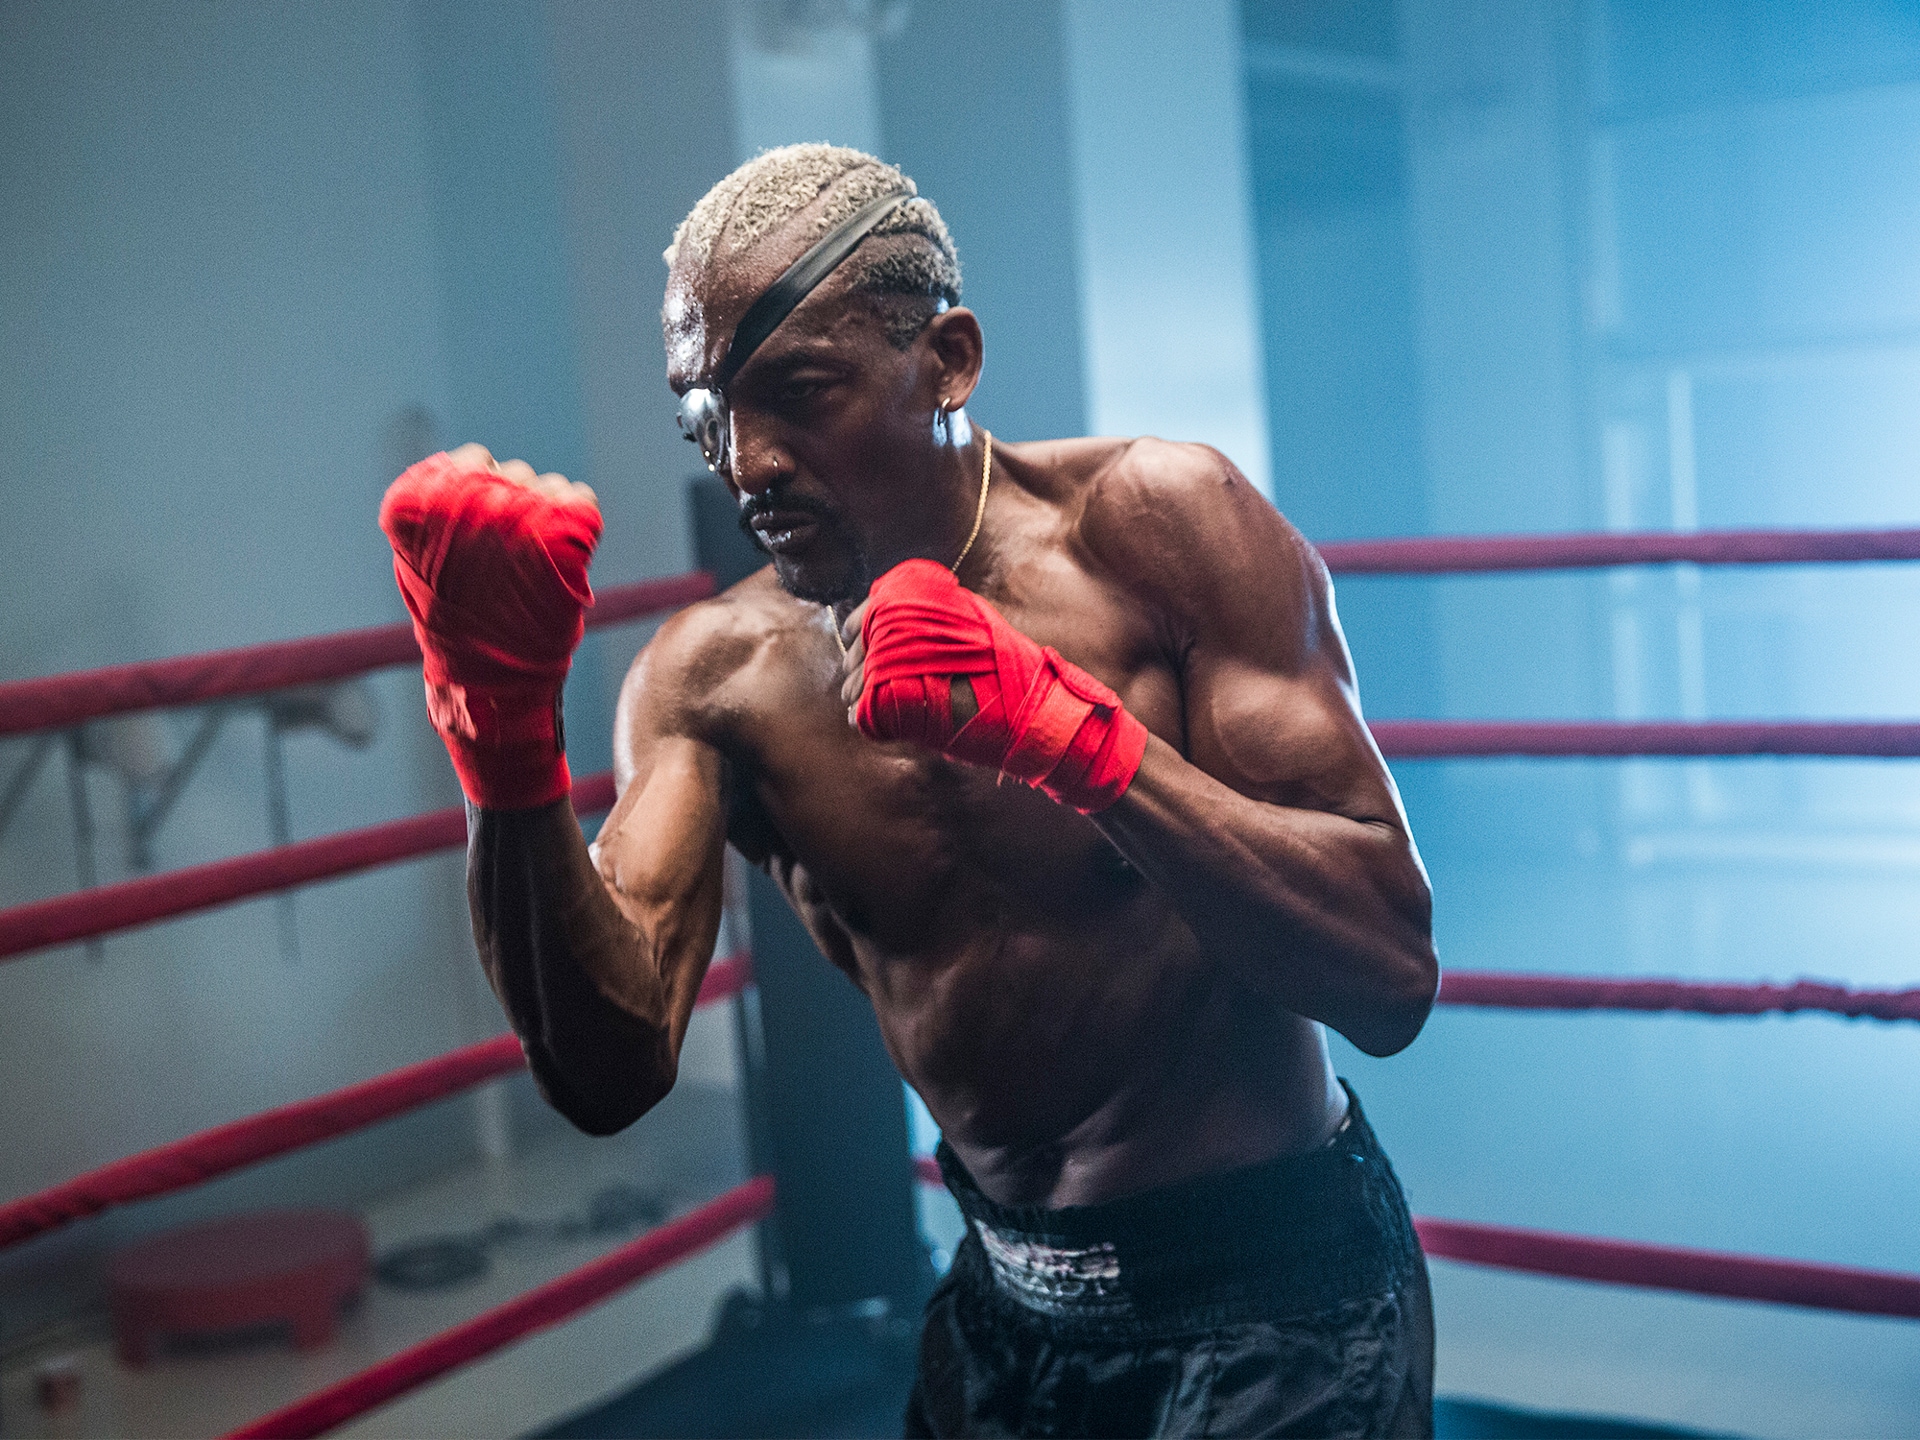 Michael's 5 sharpest boxing moves for burning fat